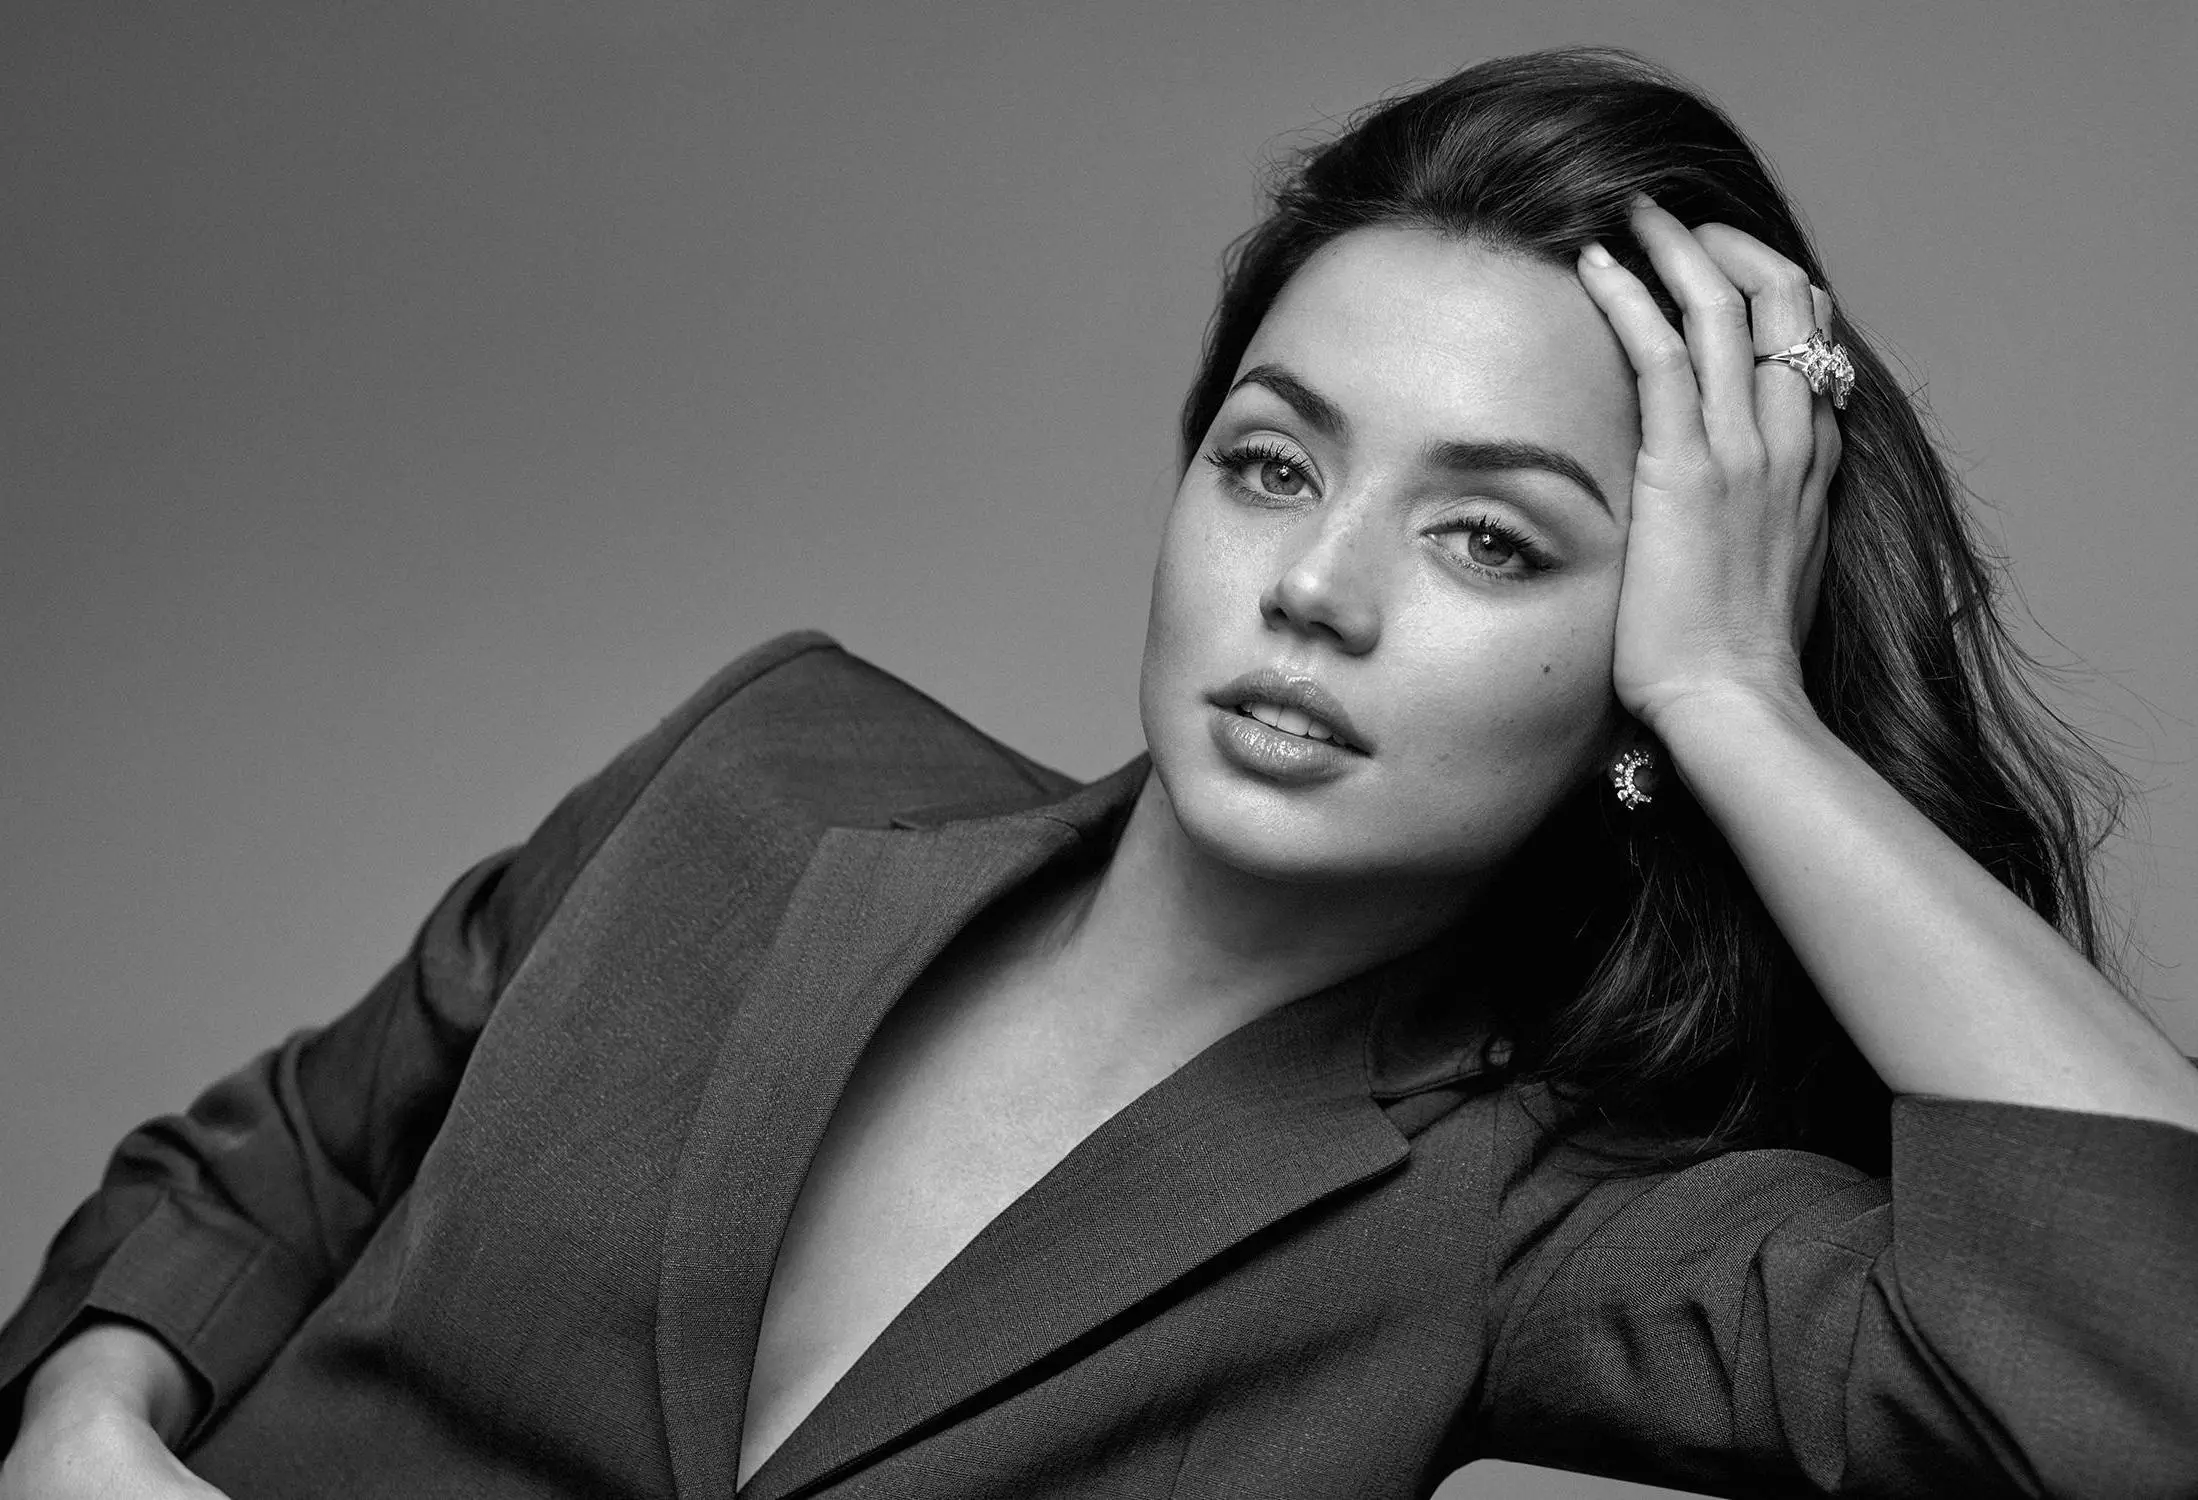 Ana de Armas by Thomas Whiteside for The Sunday Times Style 24 January